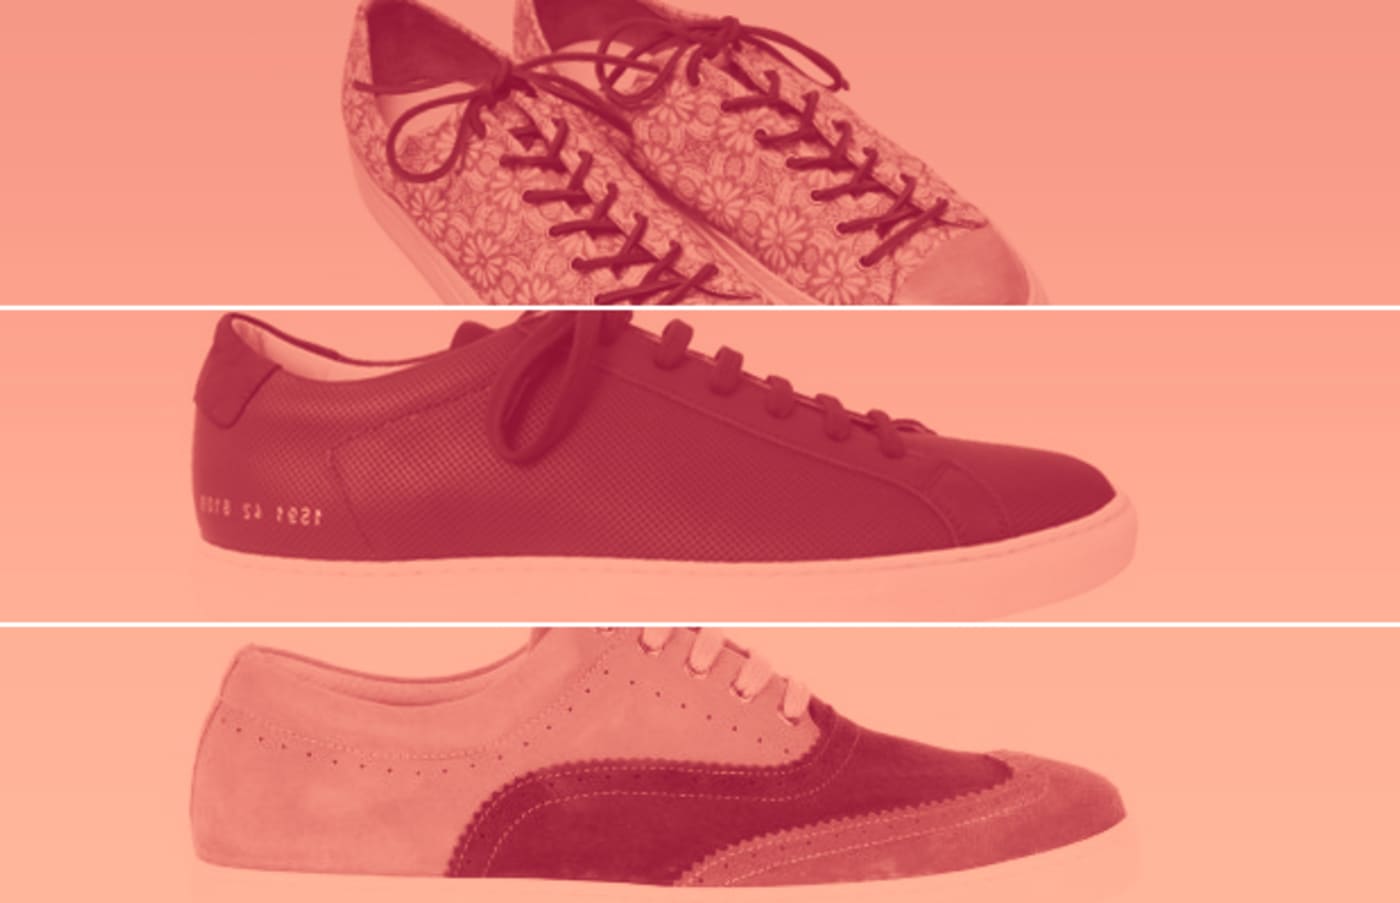 New Arrivals: The 10 Coolest Designer Sneakers To Buy For Spring | Complex